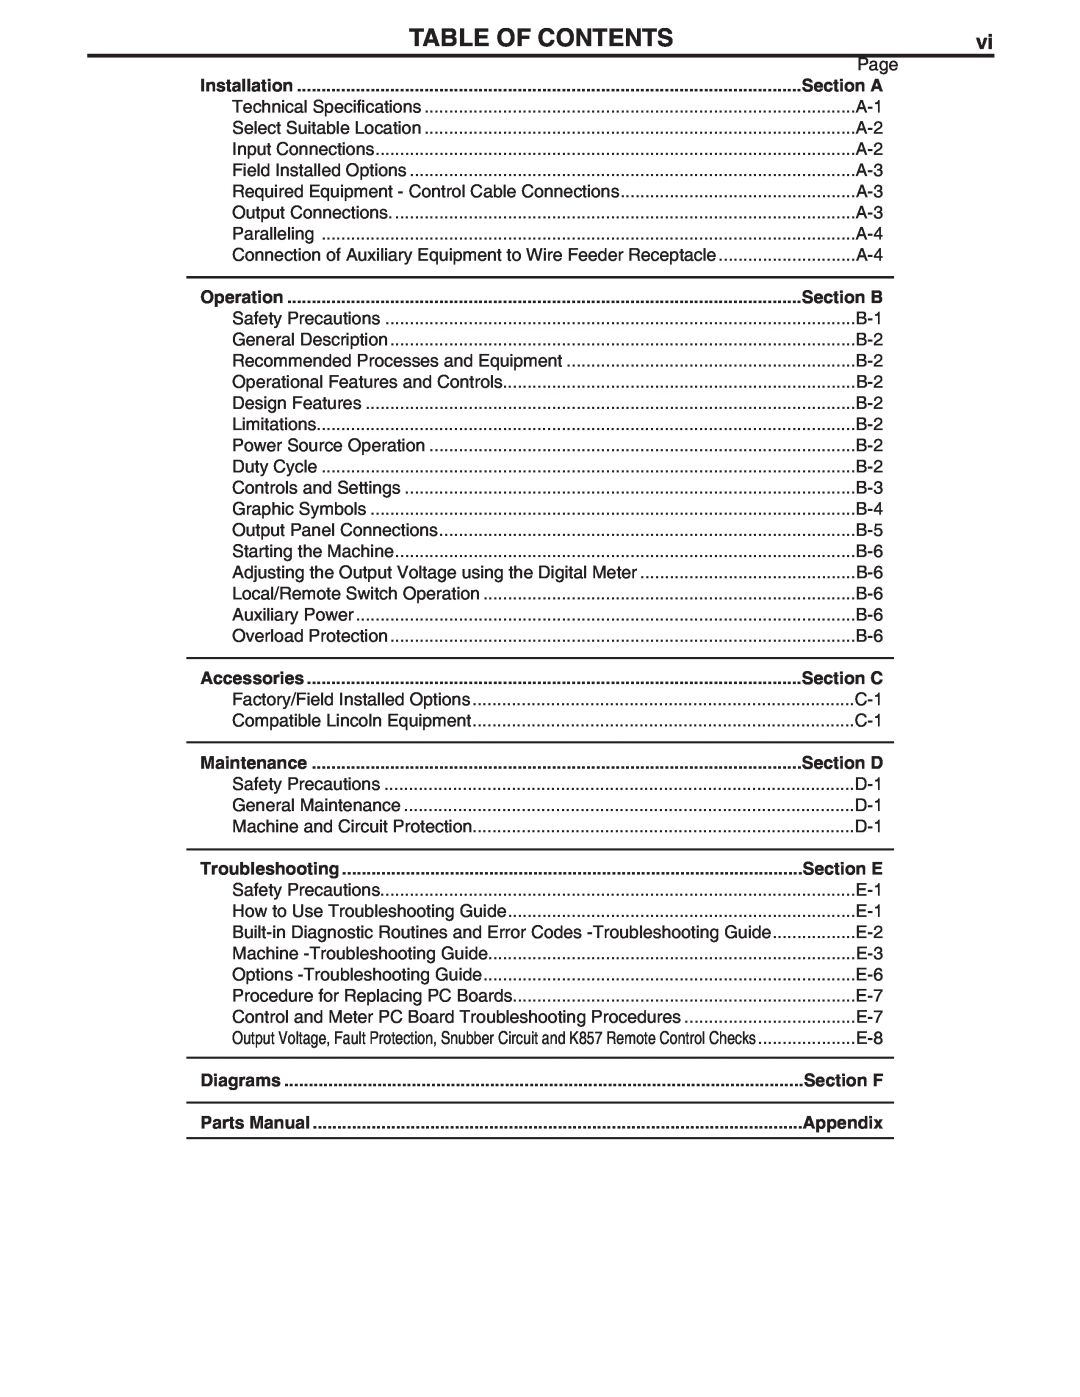 Lincoln Electric CV-300 Table Of Contents, Section A, Section B, Section C, Section D, Section E, Section F, Appendix 